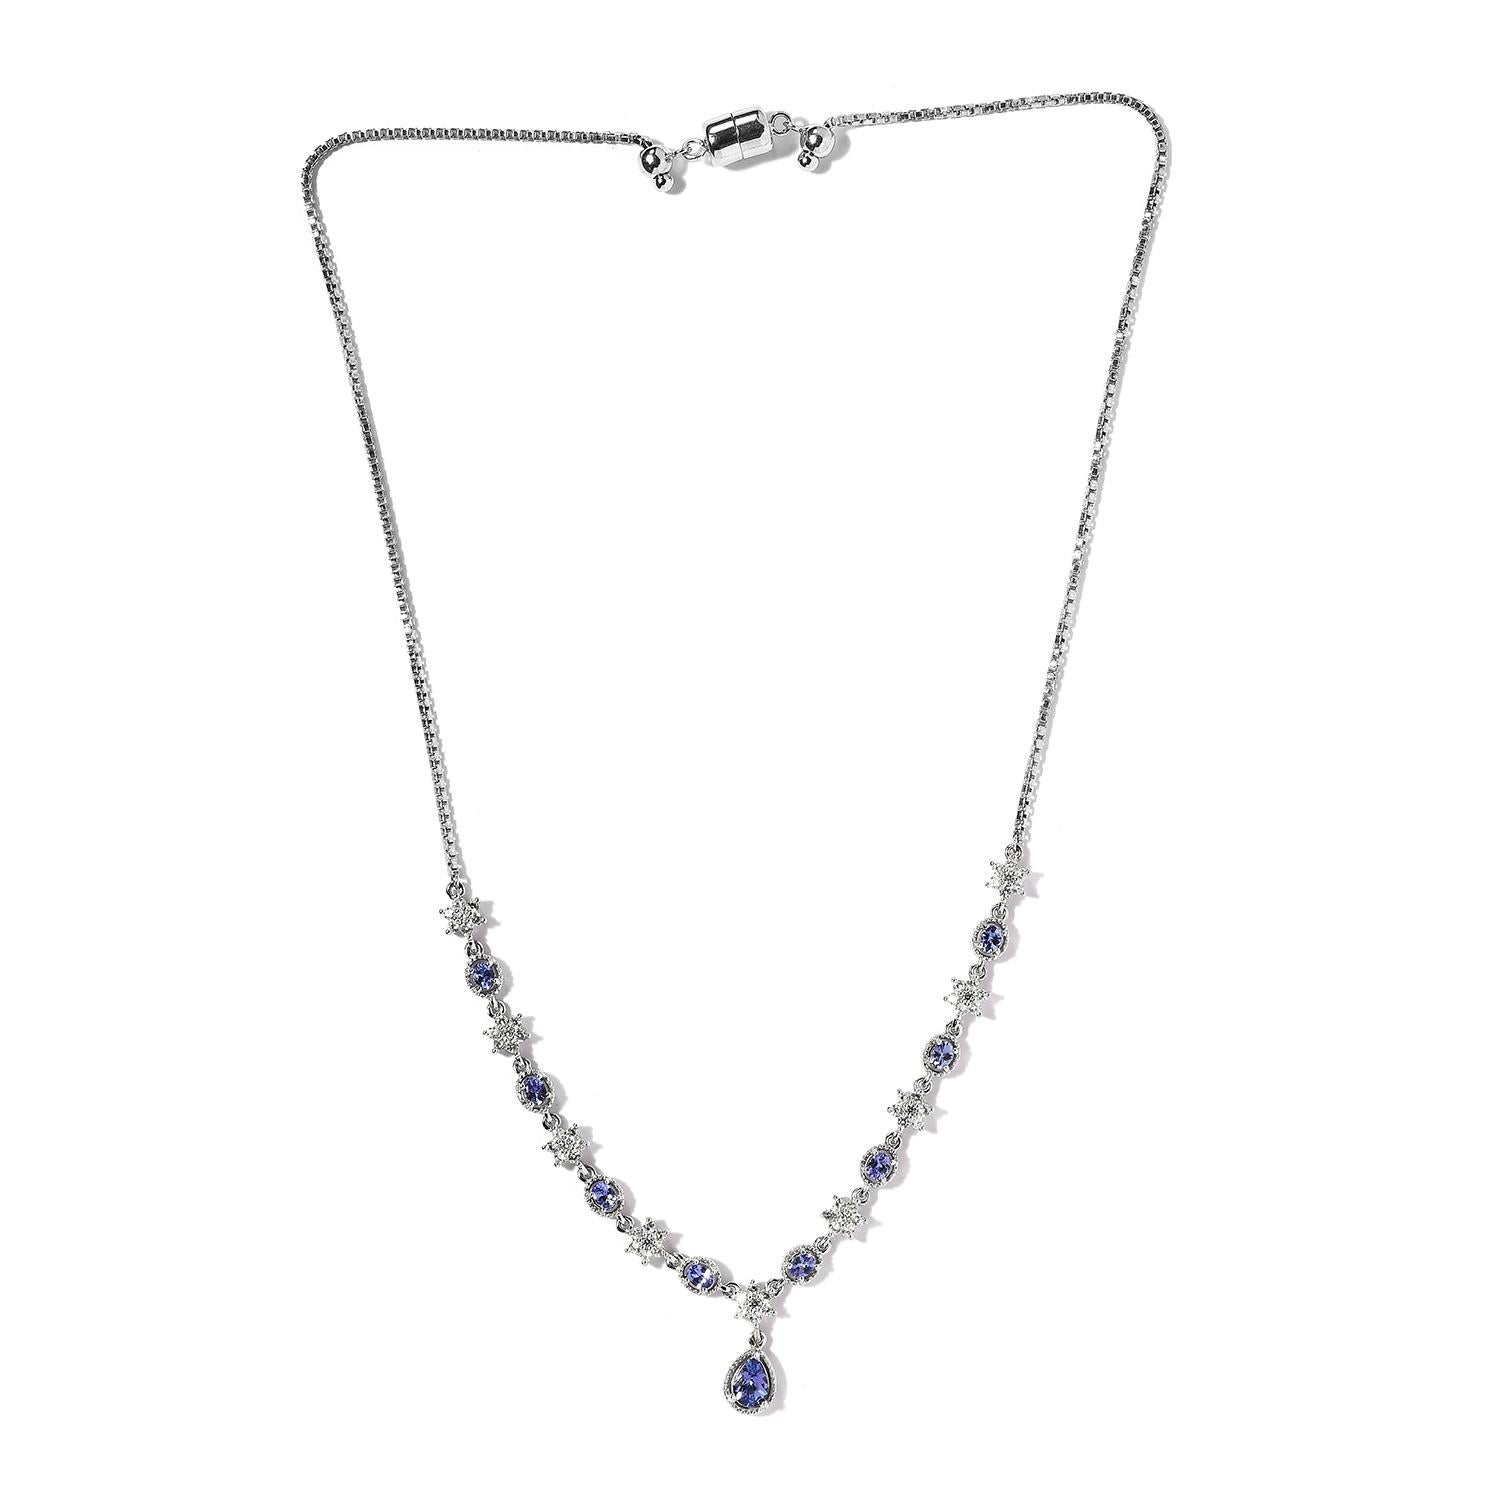 Handmade item
Ships from a small business in New Jersey
Necklace length: 18 Inches
Materials: Silver, Stone
Gemstone: Tanzanite
Closure: Ball & joint
Chain style: Figaro
Style: Boho & hippie

Description**************************

Gemstone ---